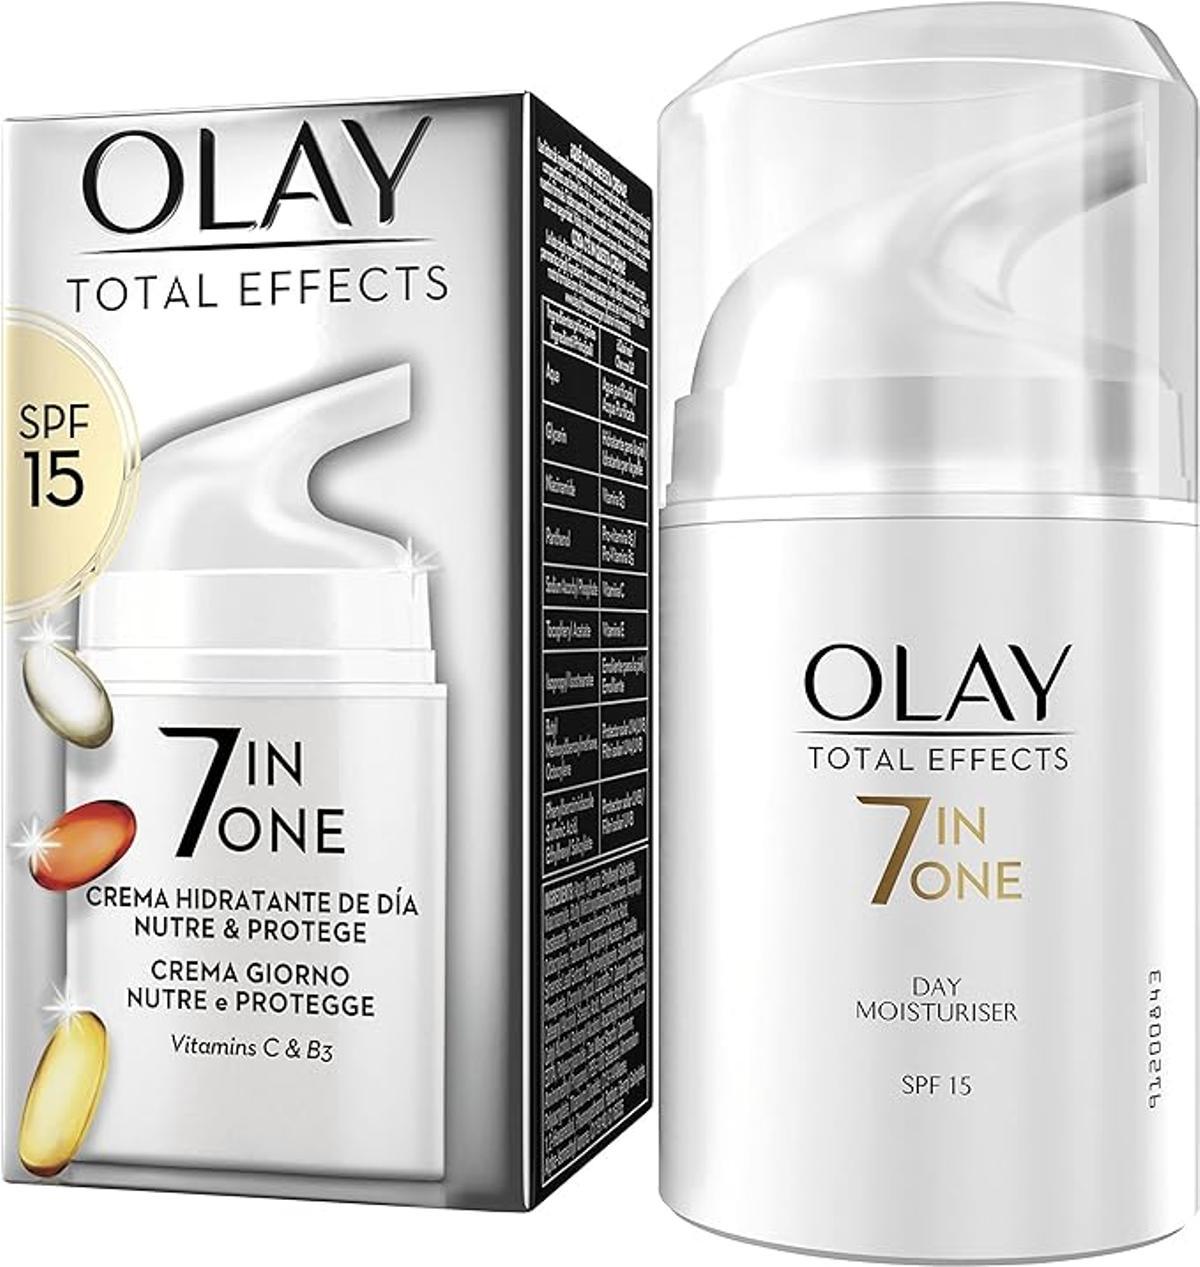 Crema Olay Total Effects 7